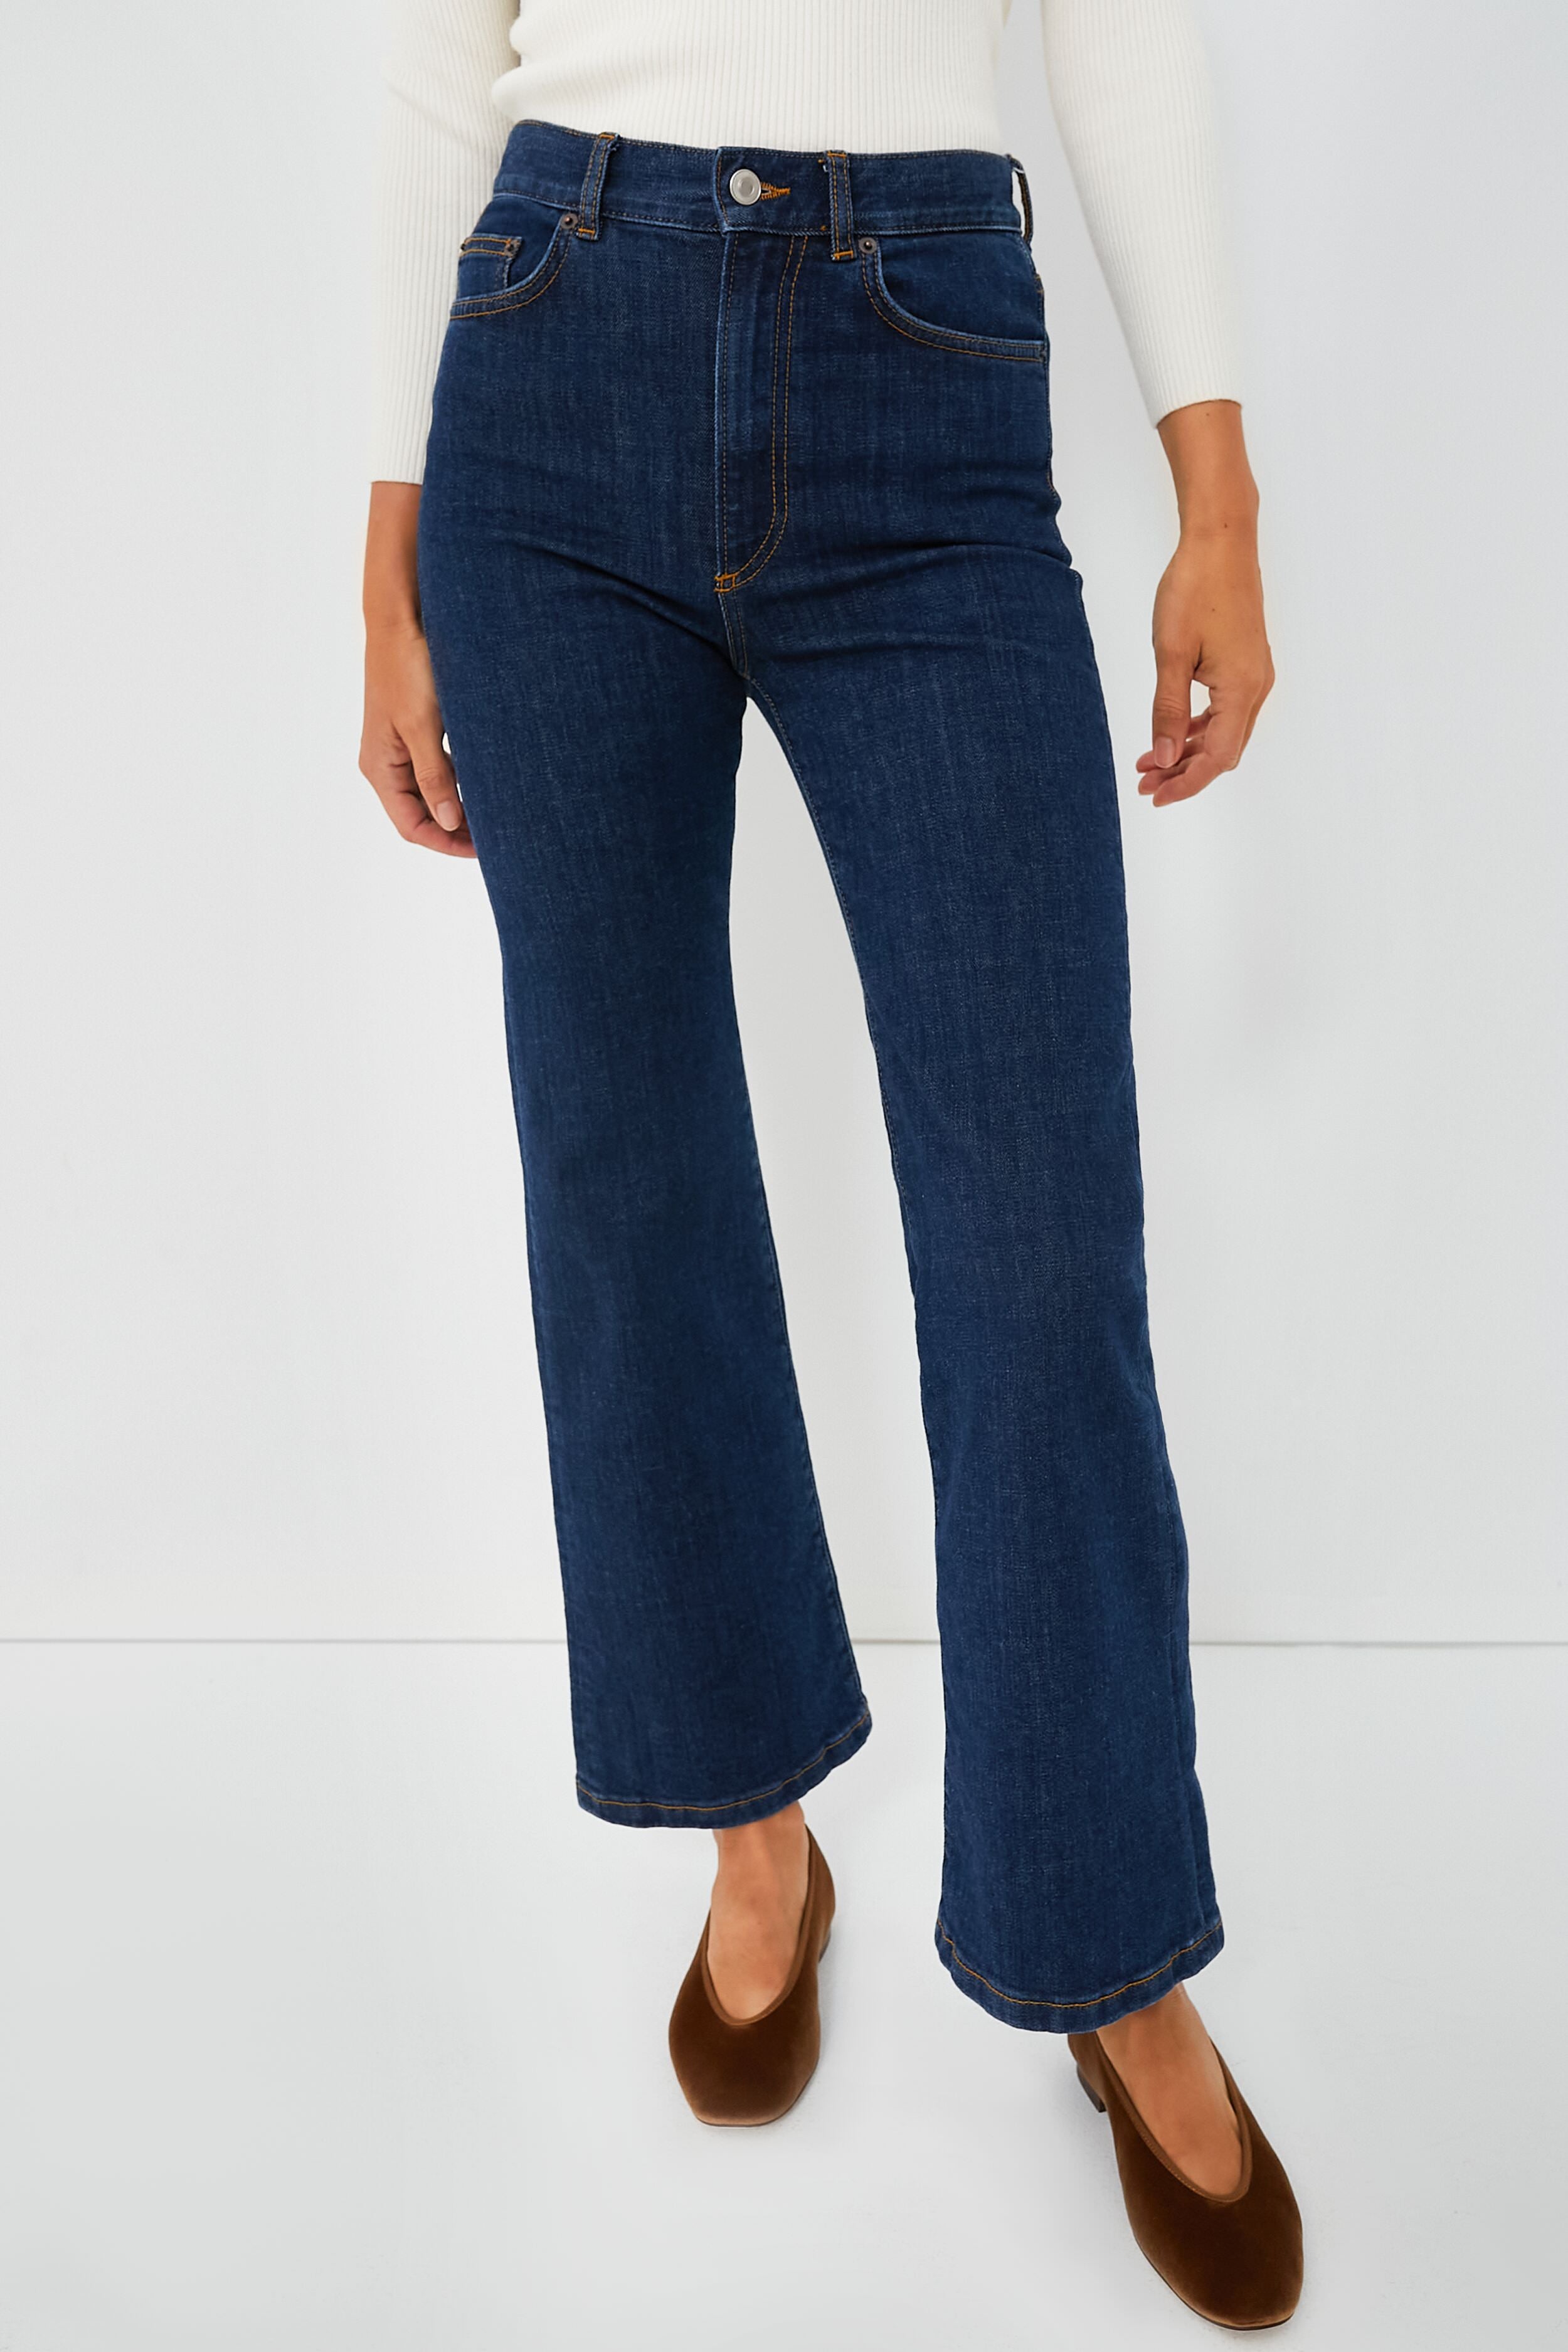 Weeks Pyramid Jeanerica Blue | 2 Jeans